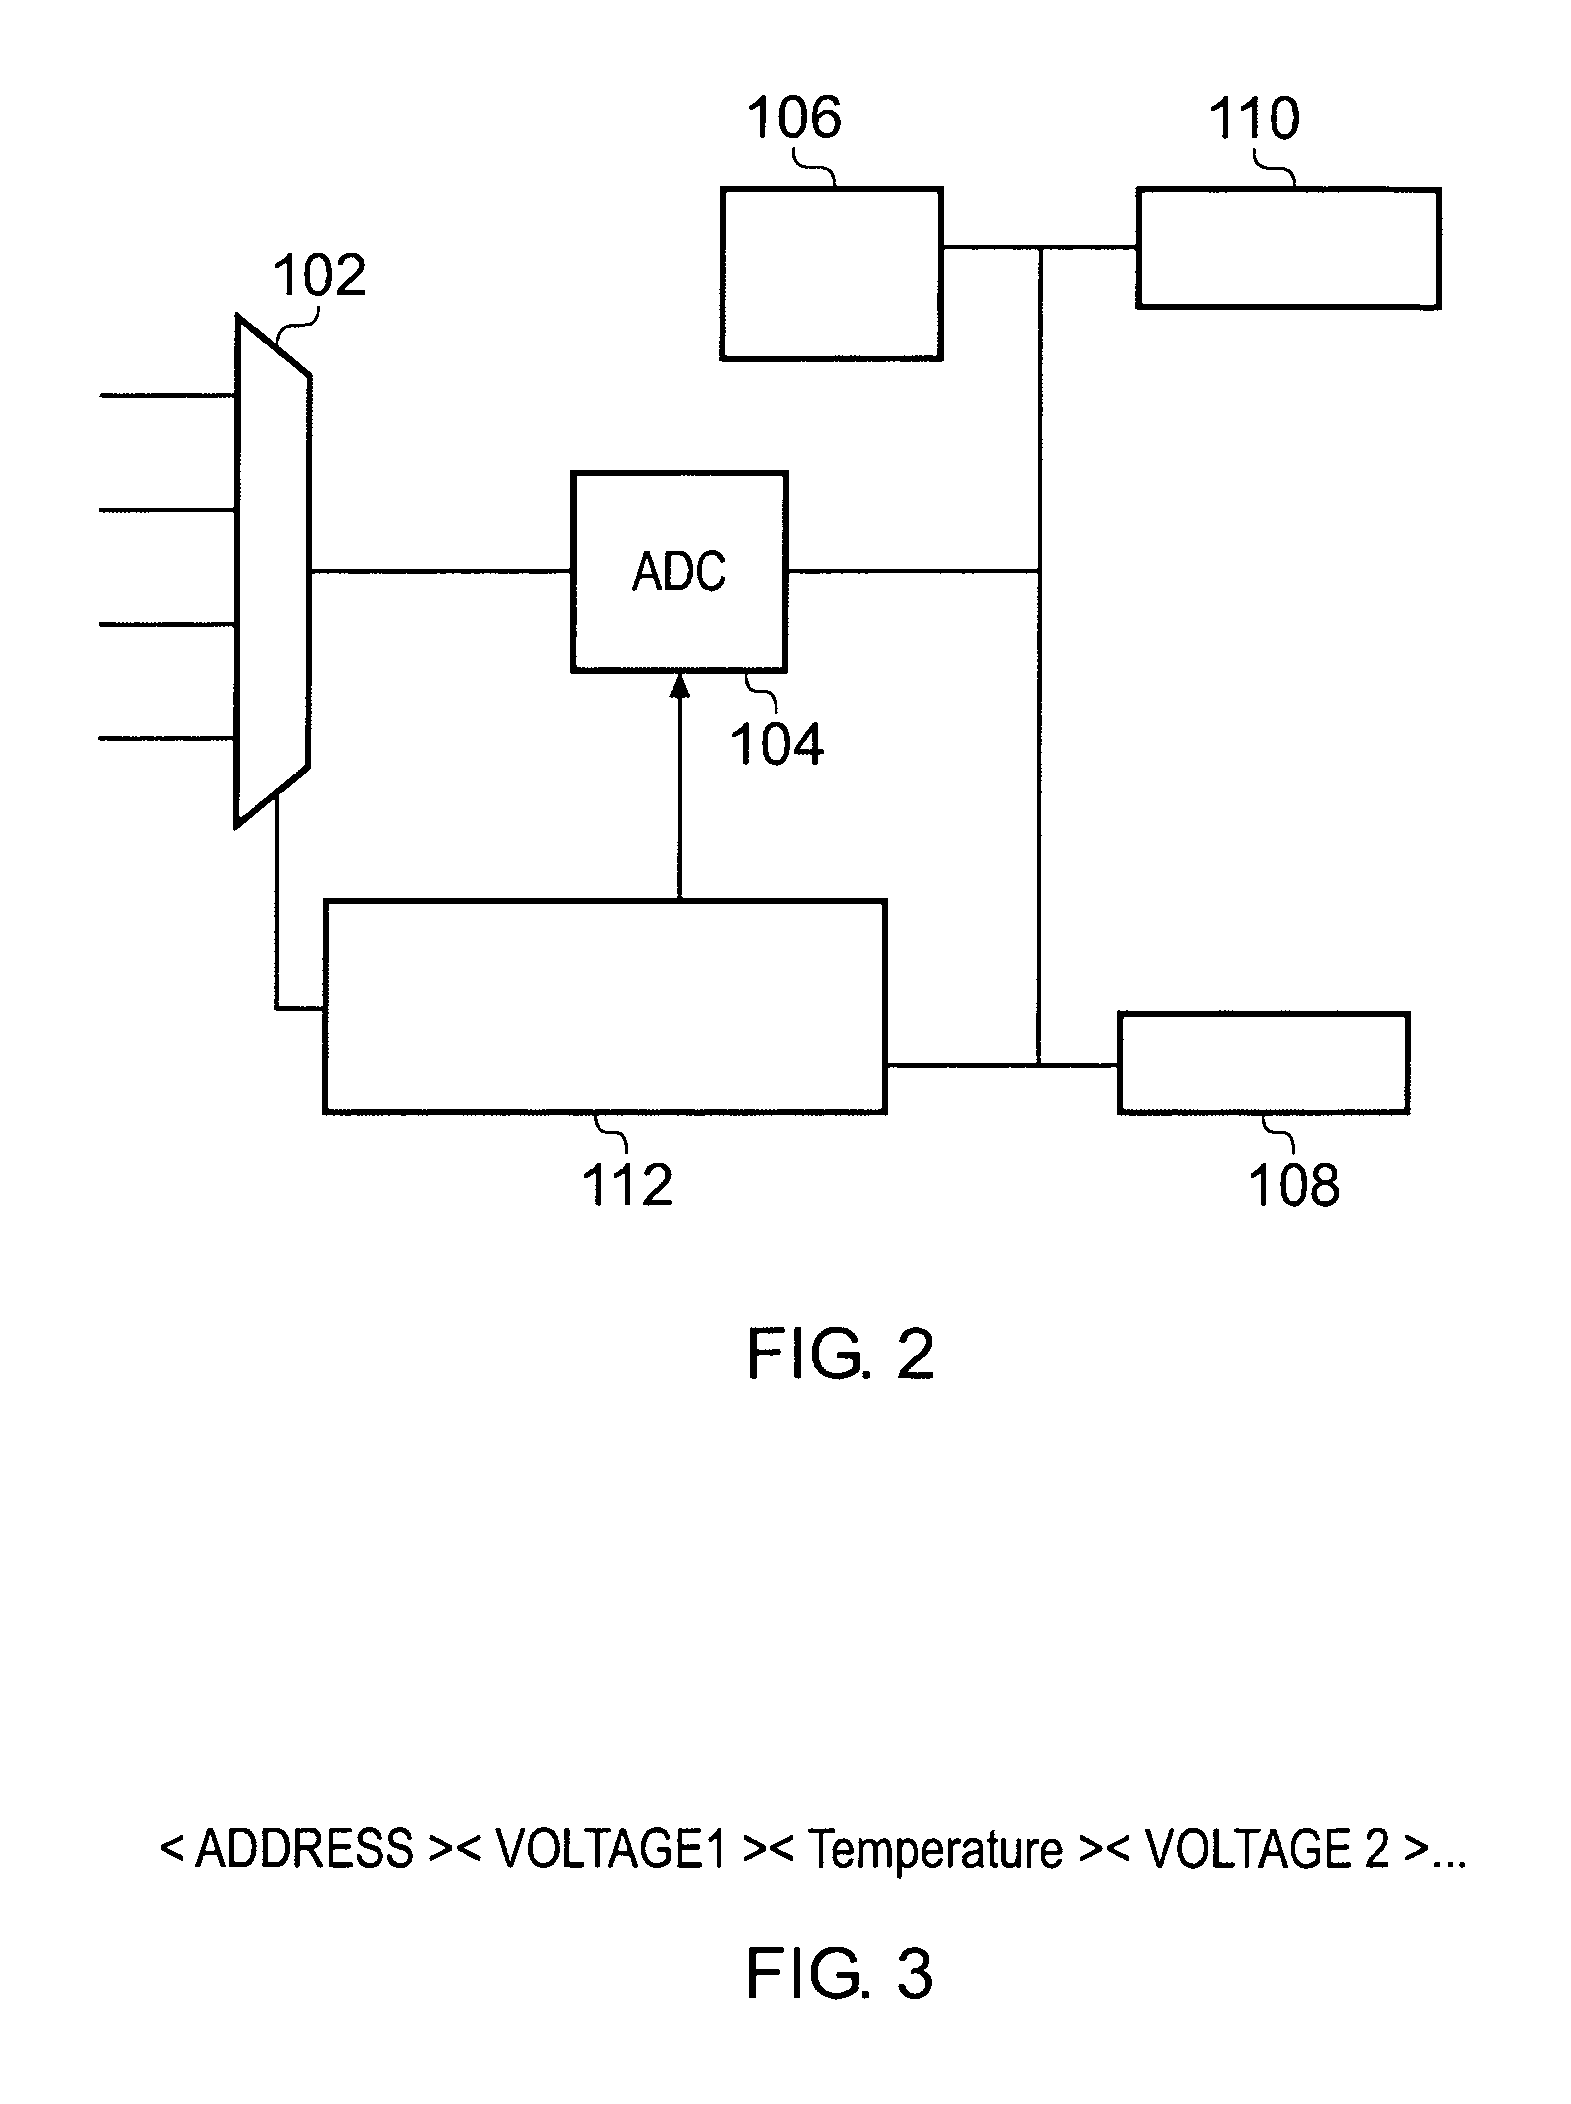 Battery monitoring apparatus and daisy chain interface suitable for use in a battery monitoring apparatus